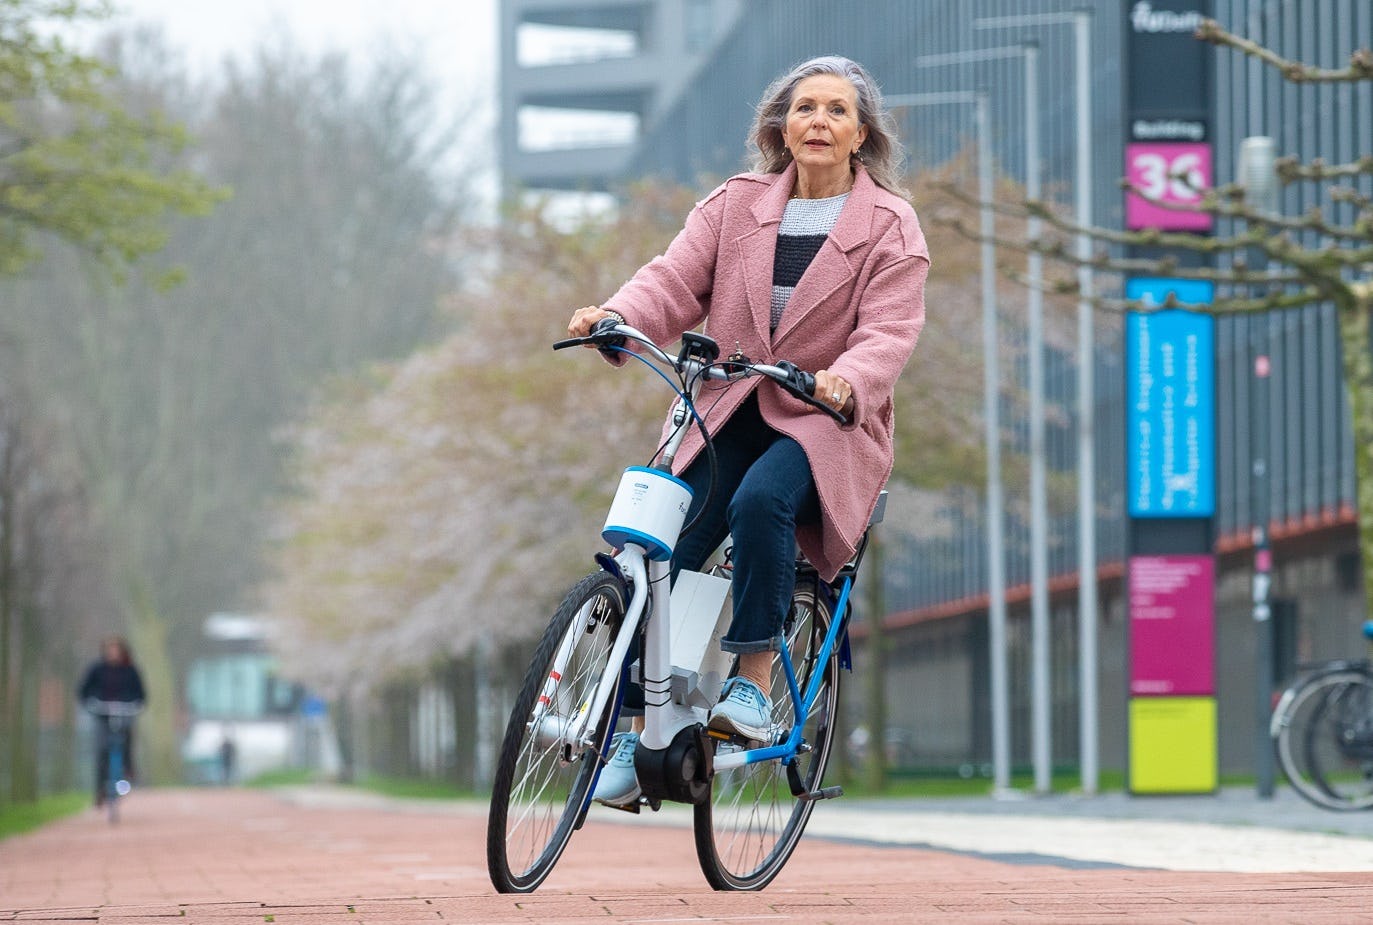 E-bike equipped with steer-assistant function developed at TU Delft Cycling Lab in cooperation with Gazelle. – Photo TU Delft/Gazelle